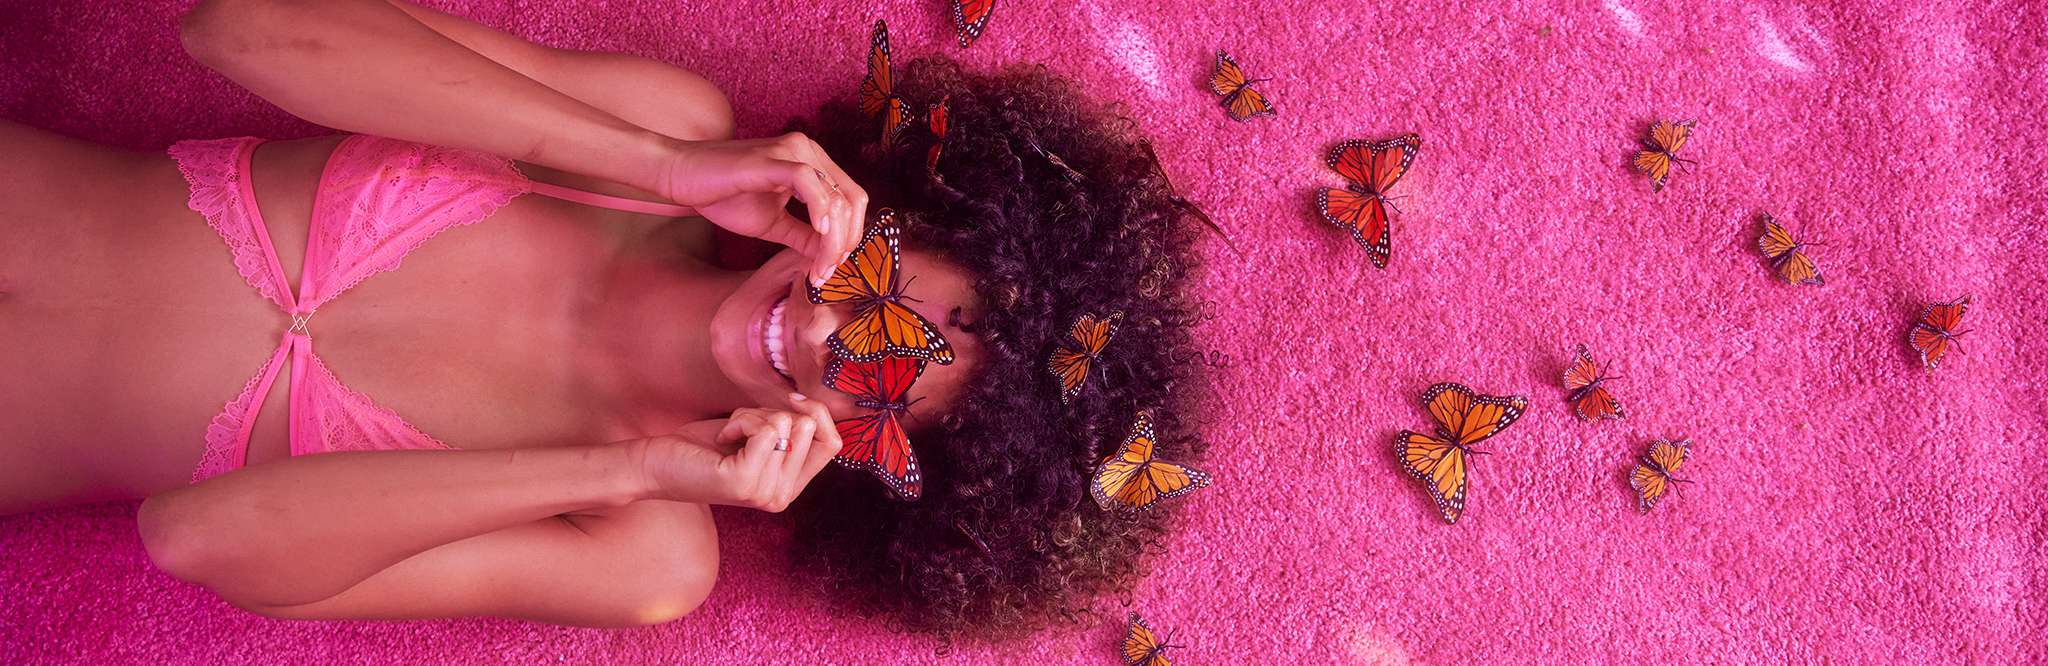 Model in pink lace bralette laying on pink grass surroded by butterflies